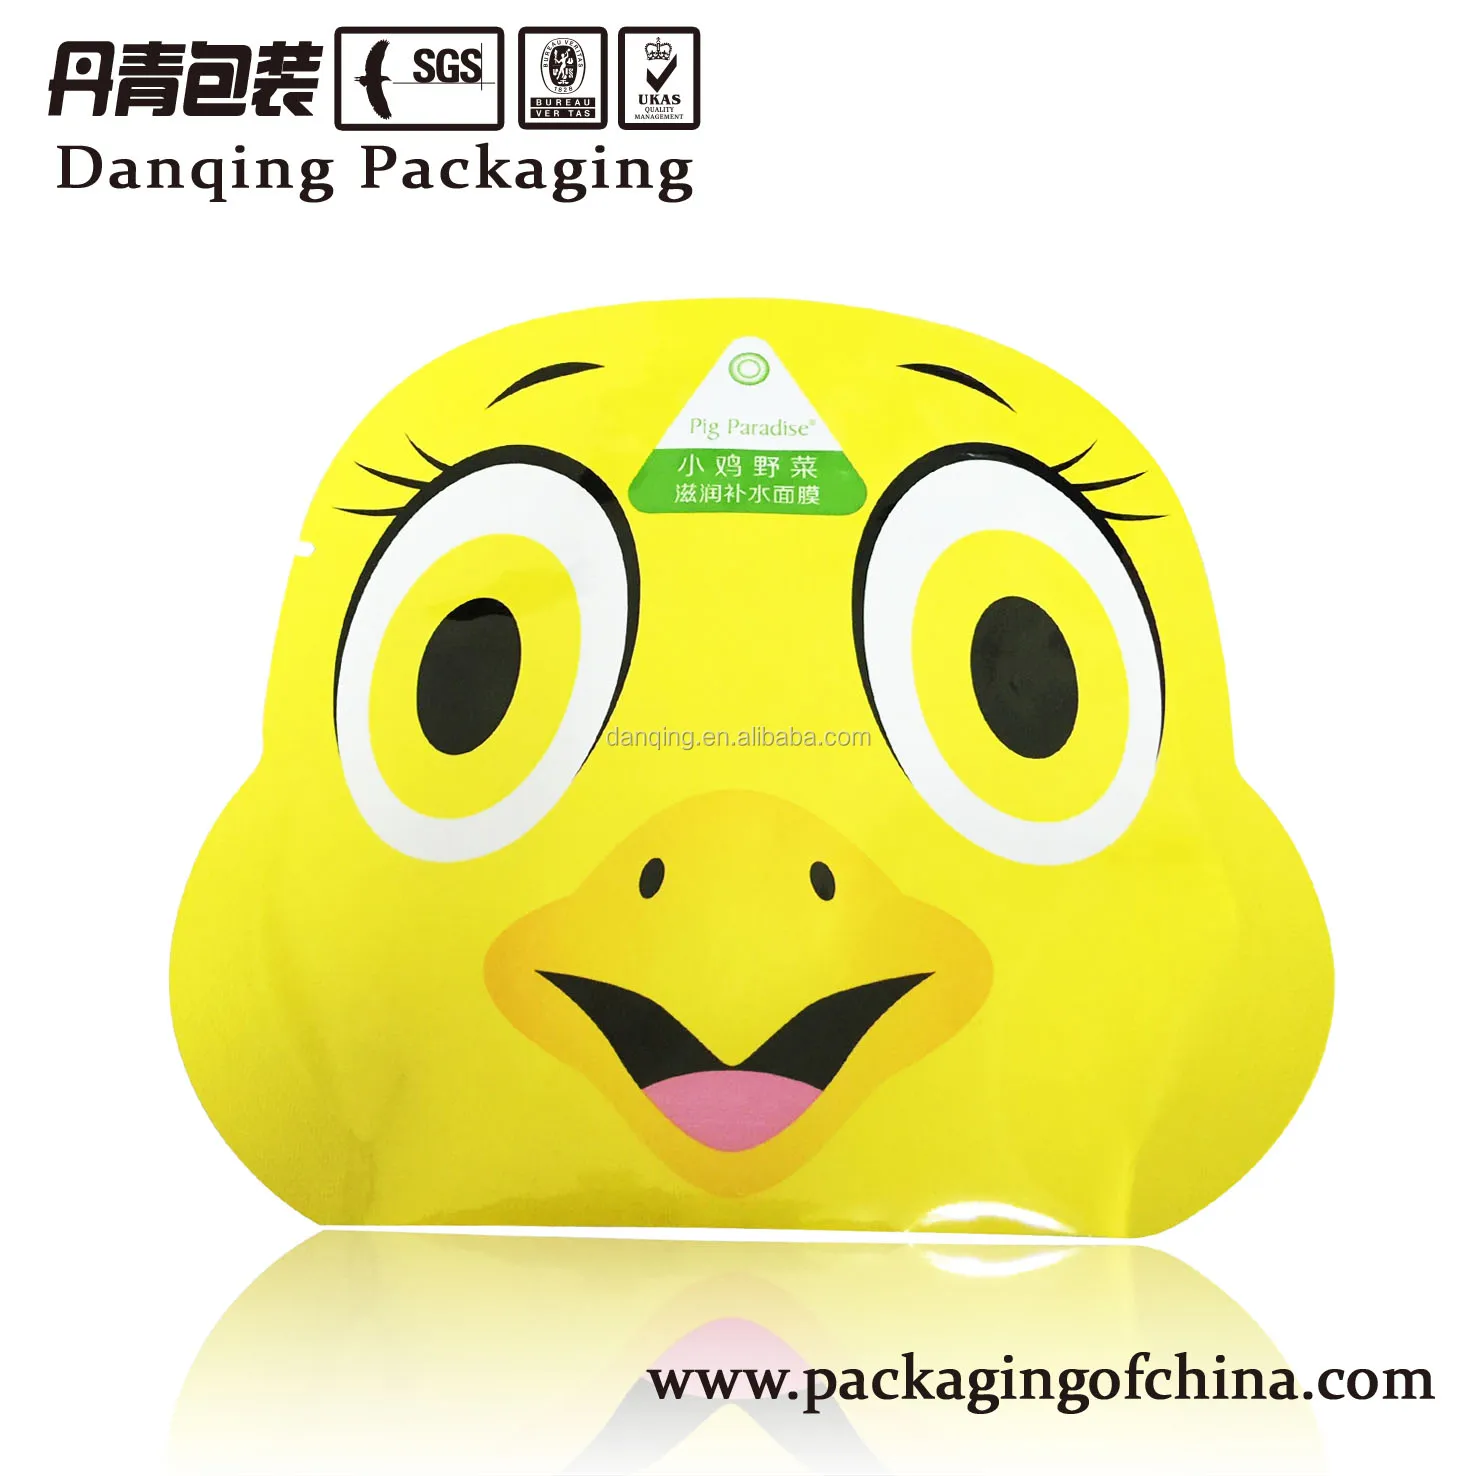 DQ PACK high quality face-pack packaging for cosmetic packaging